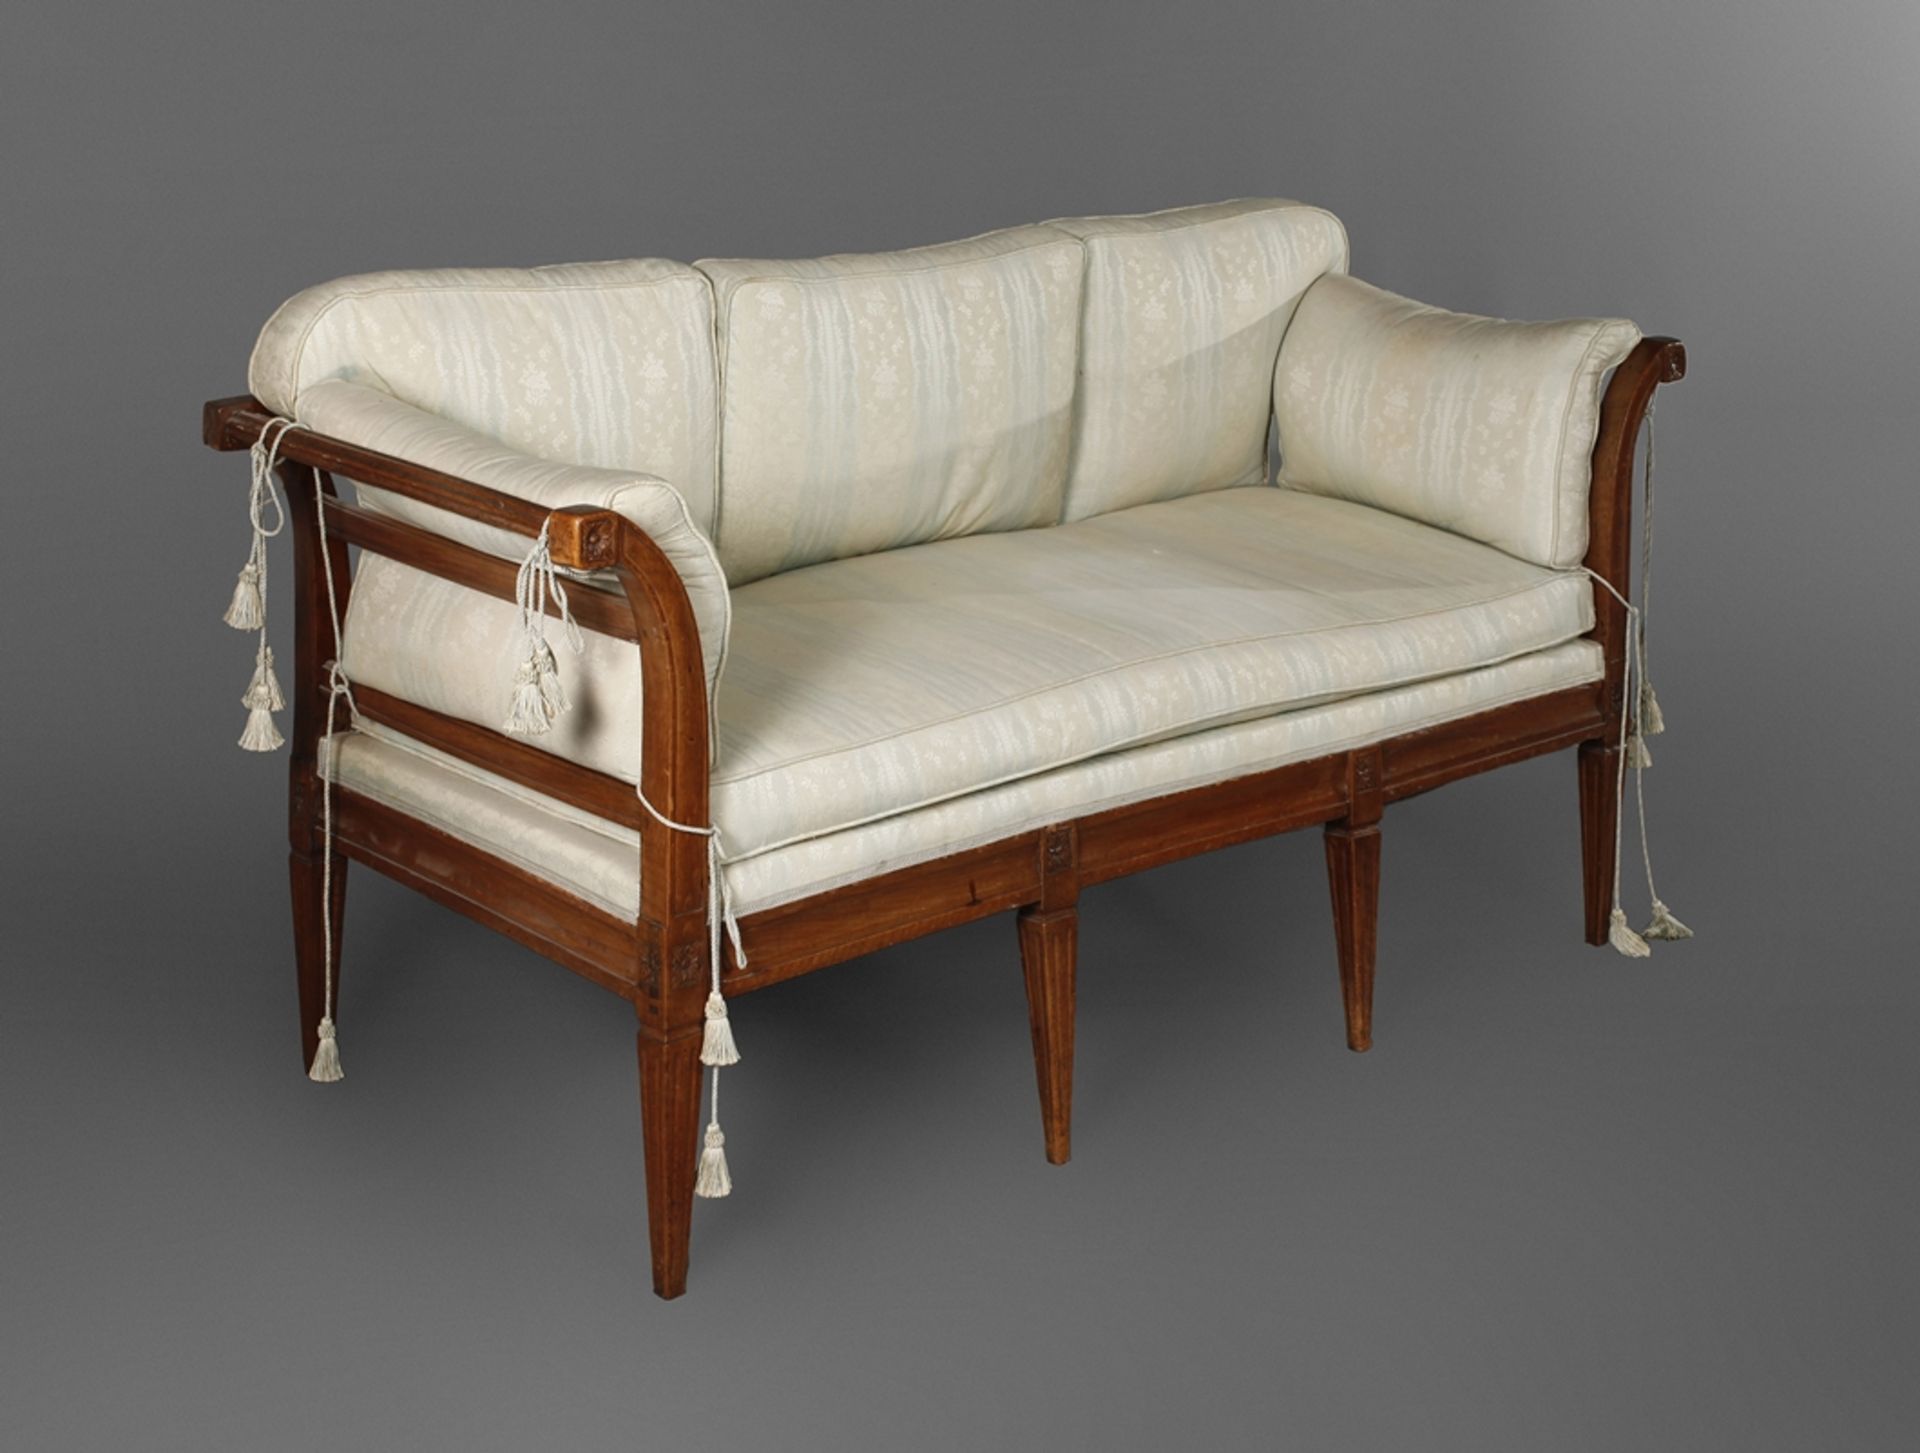 Louis Seize upholstered bench